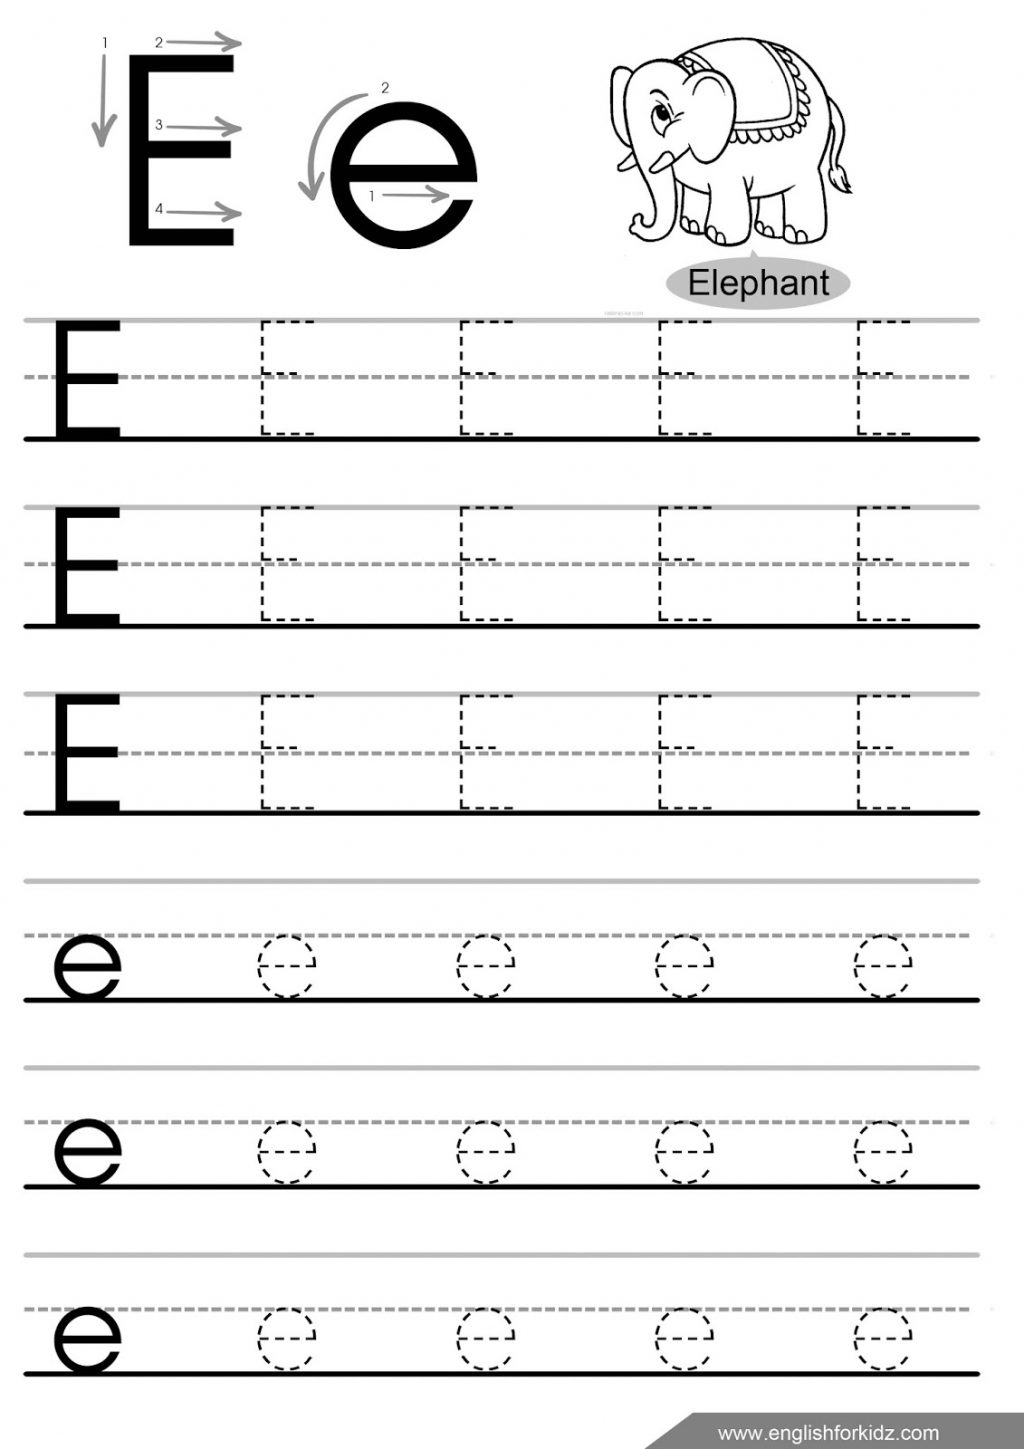 32 Fun Letter E Worksheets | Kittybabylove in Letter E Worksheets For Toddlers